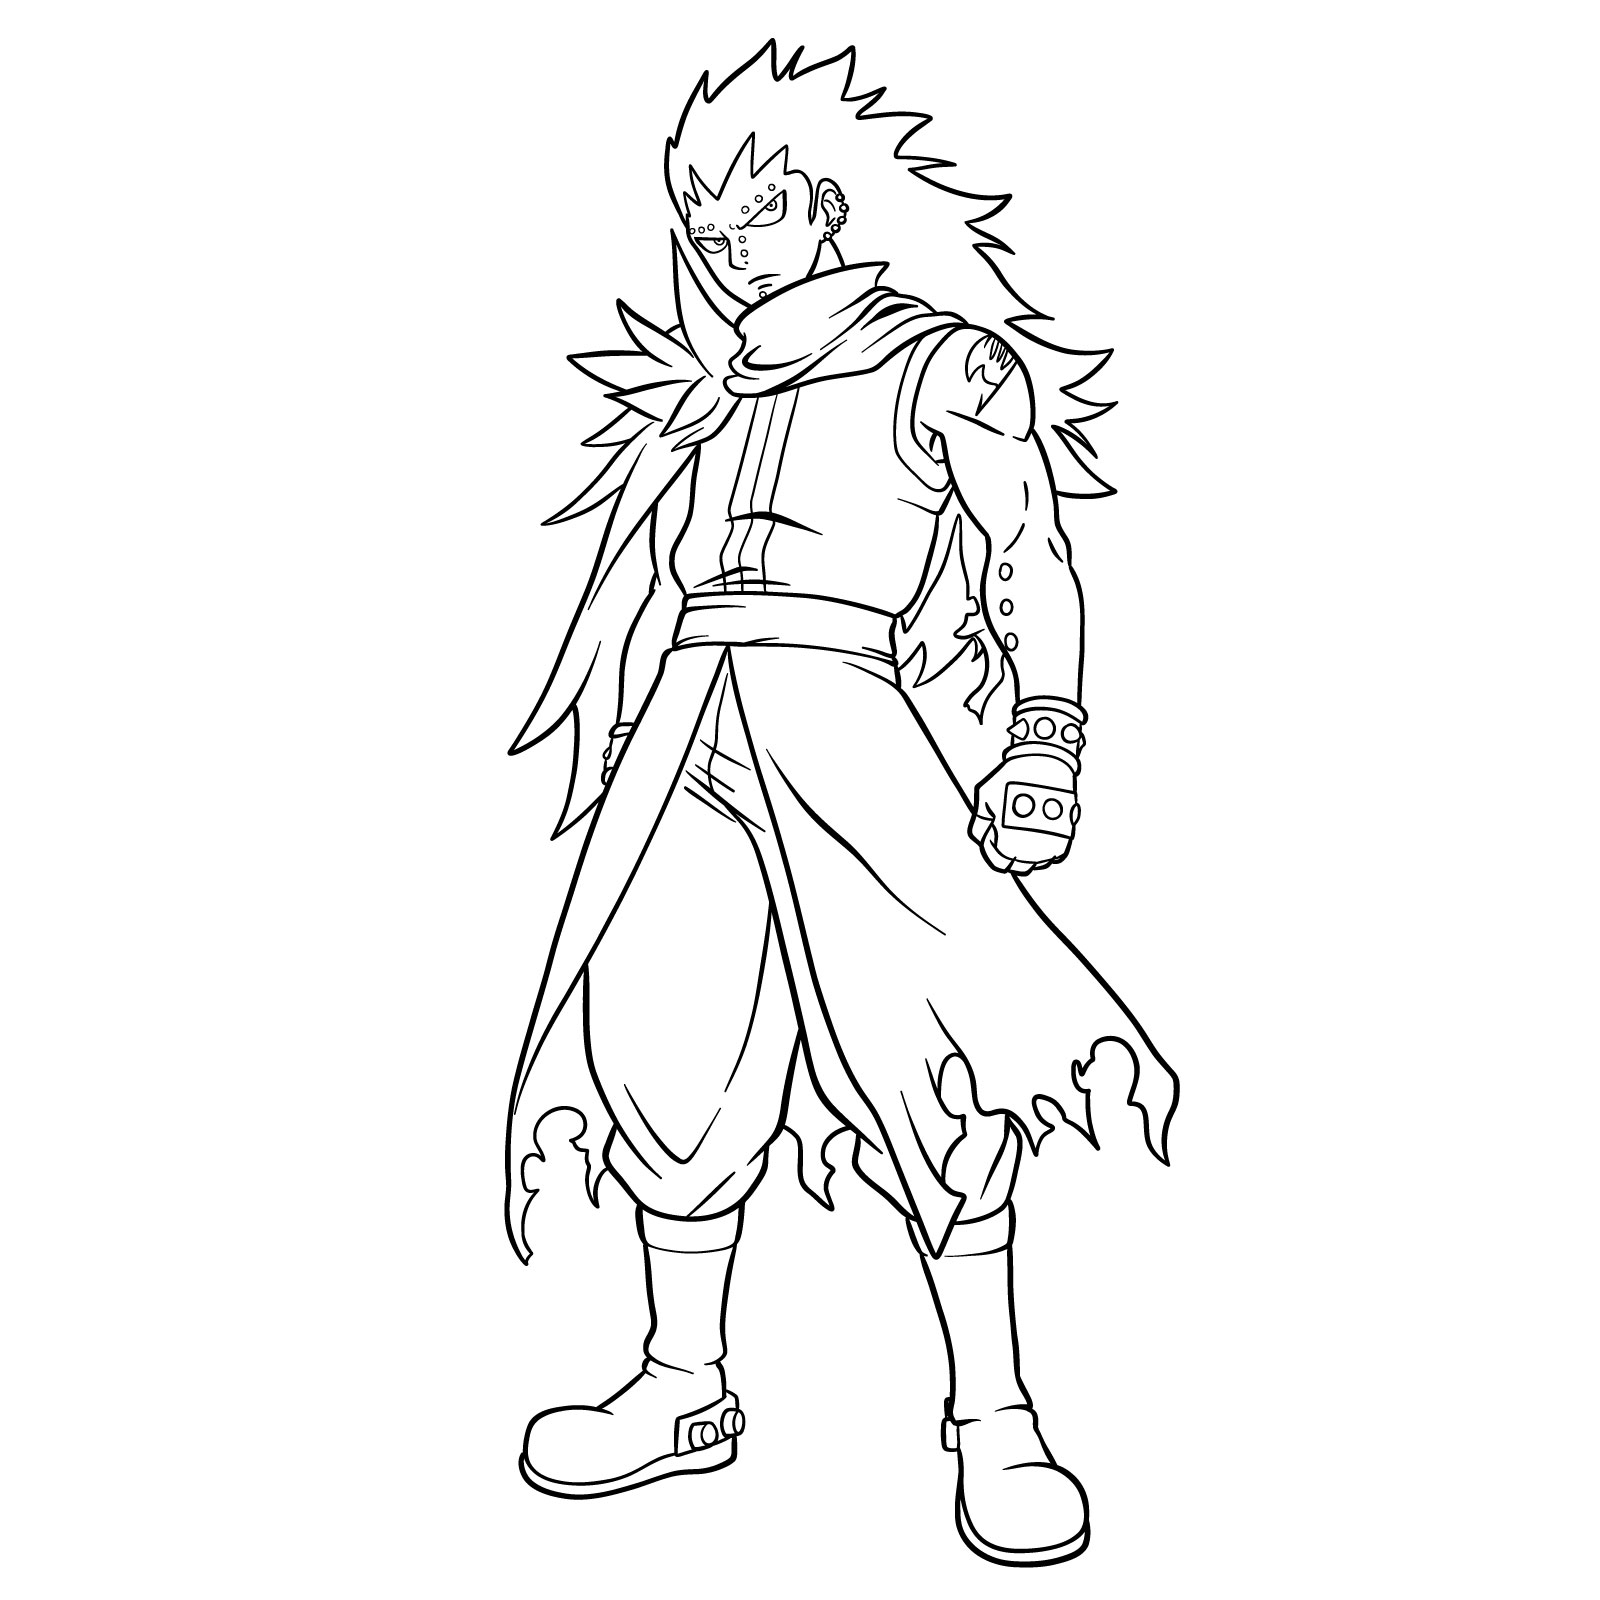 How to draw Gajeel Redfox from Fairy Tail - final step